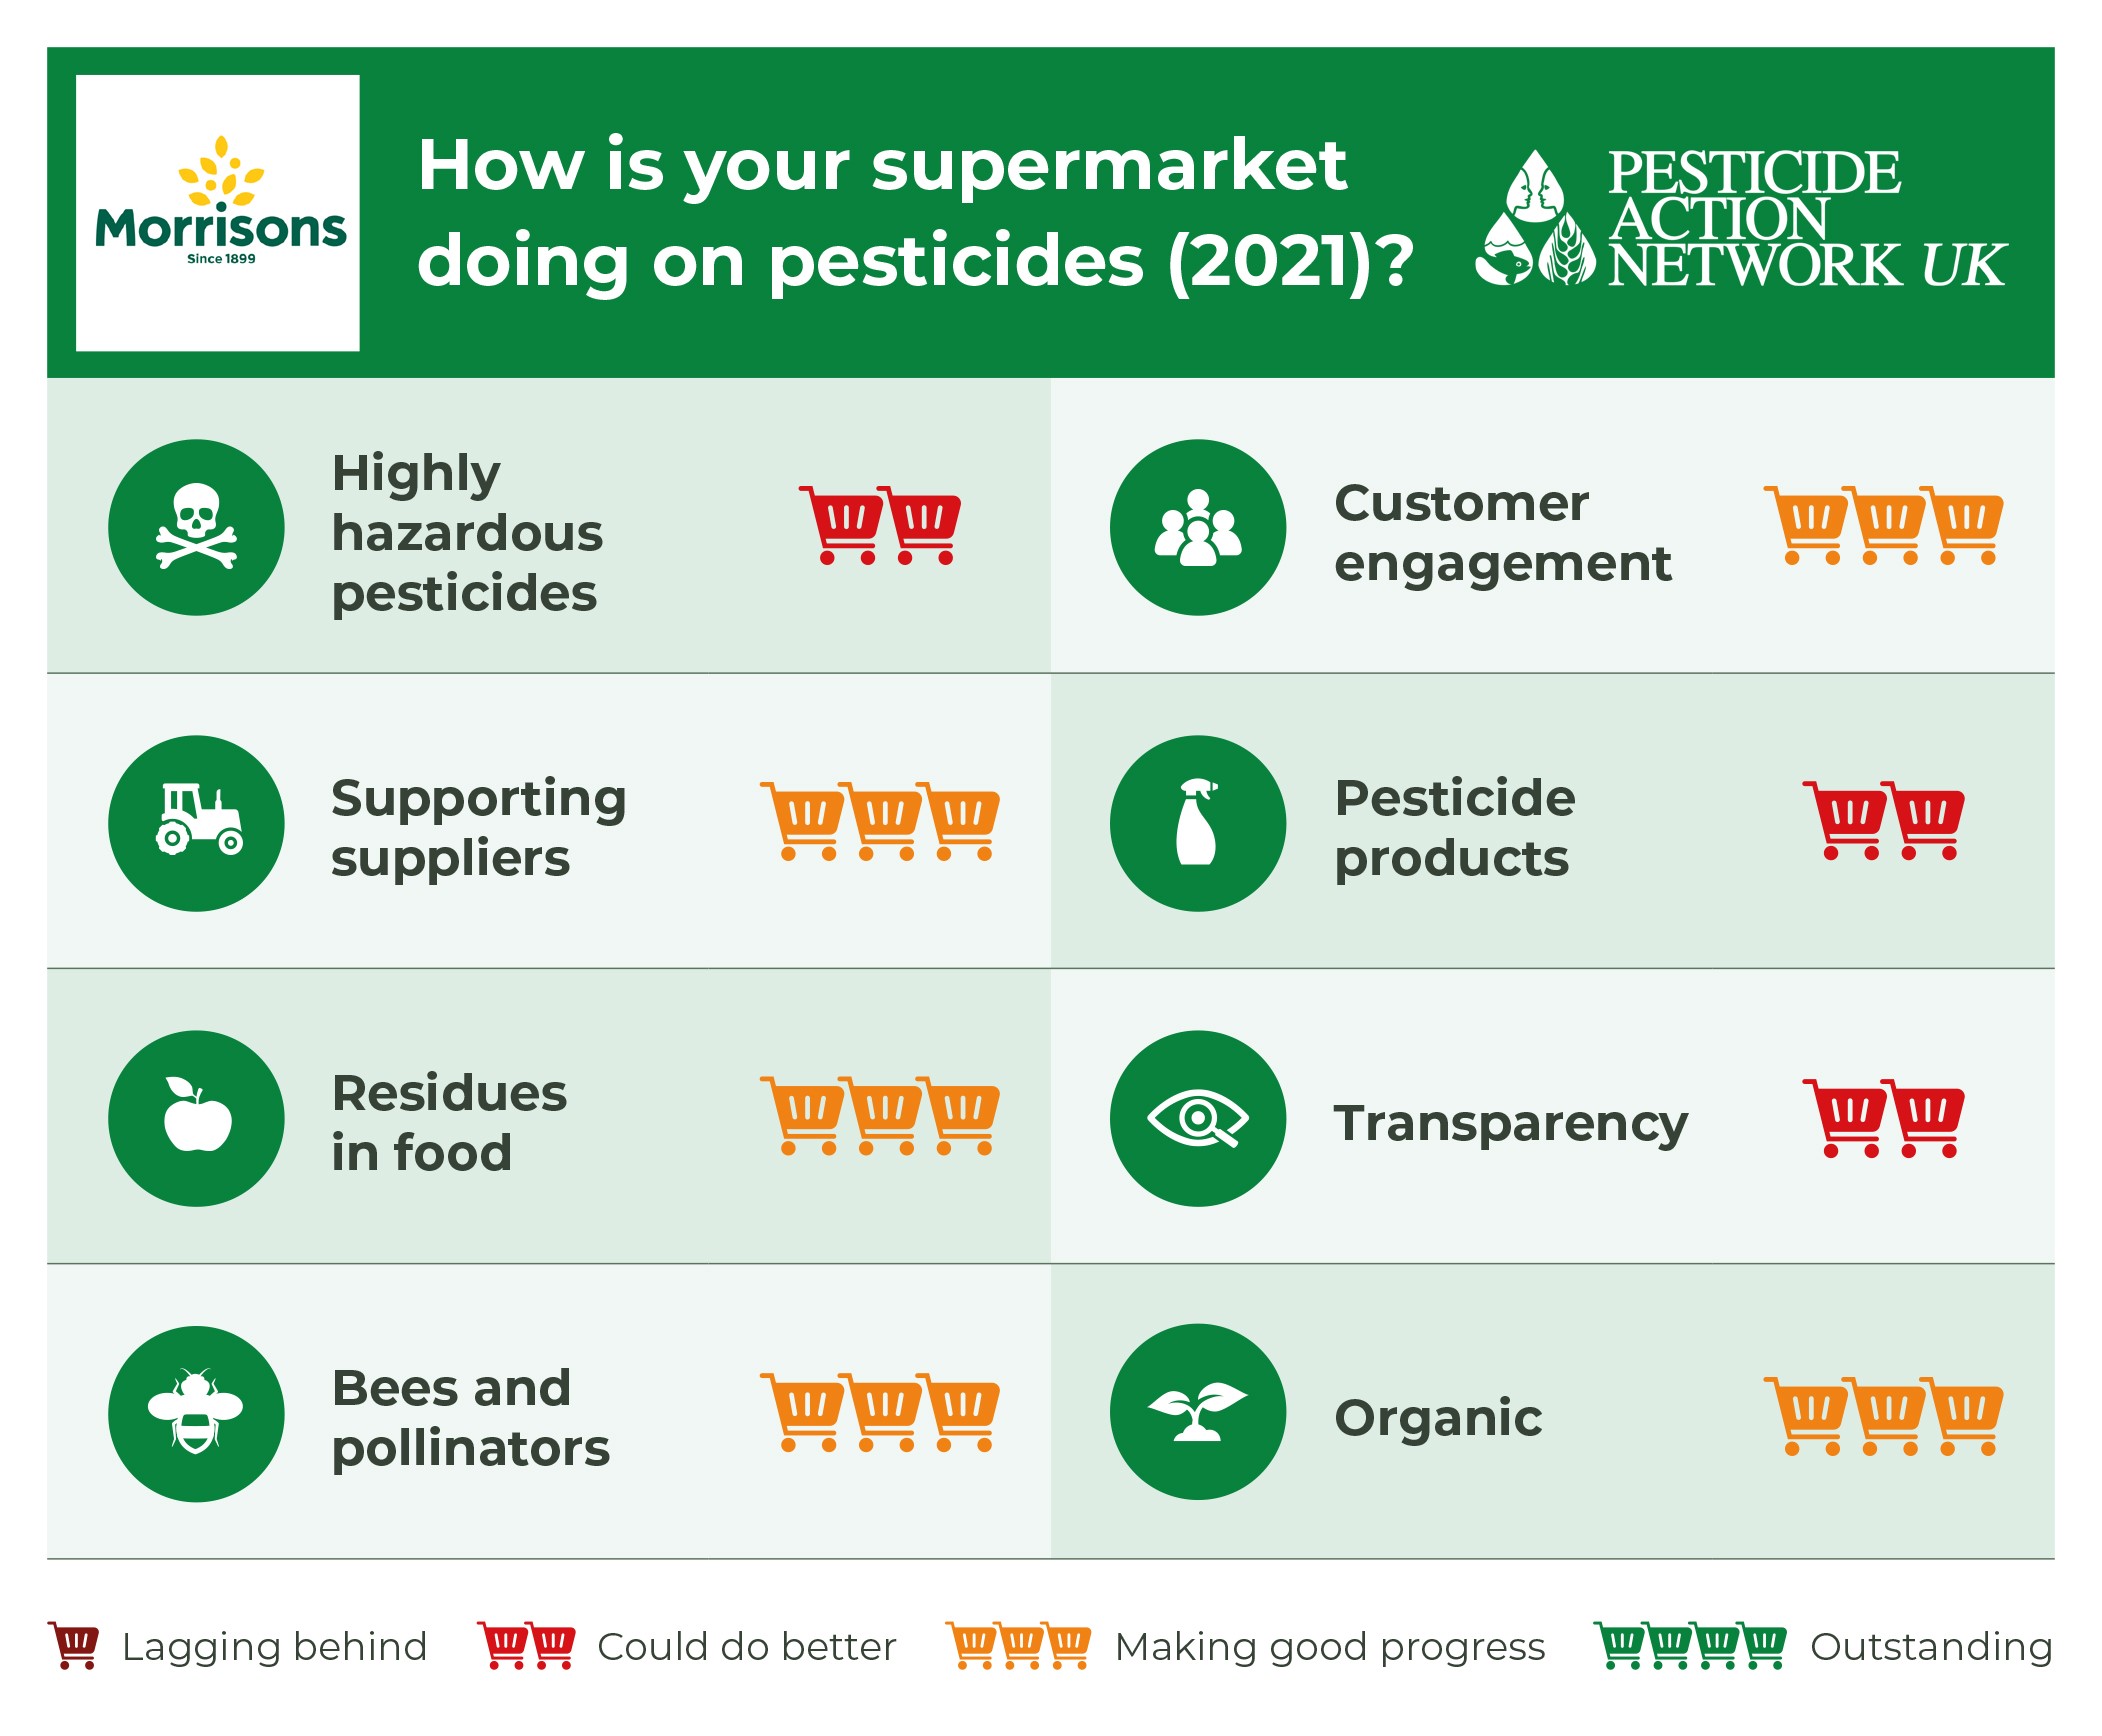 How is Morrisons doing on pesticides?